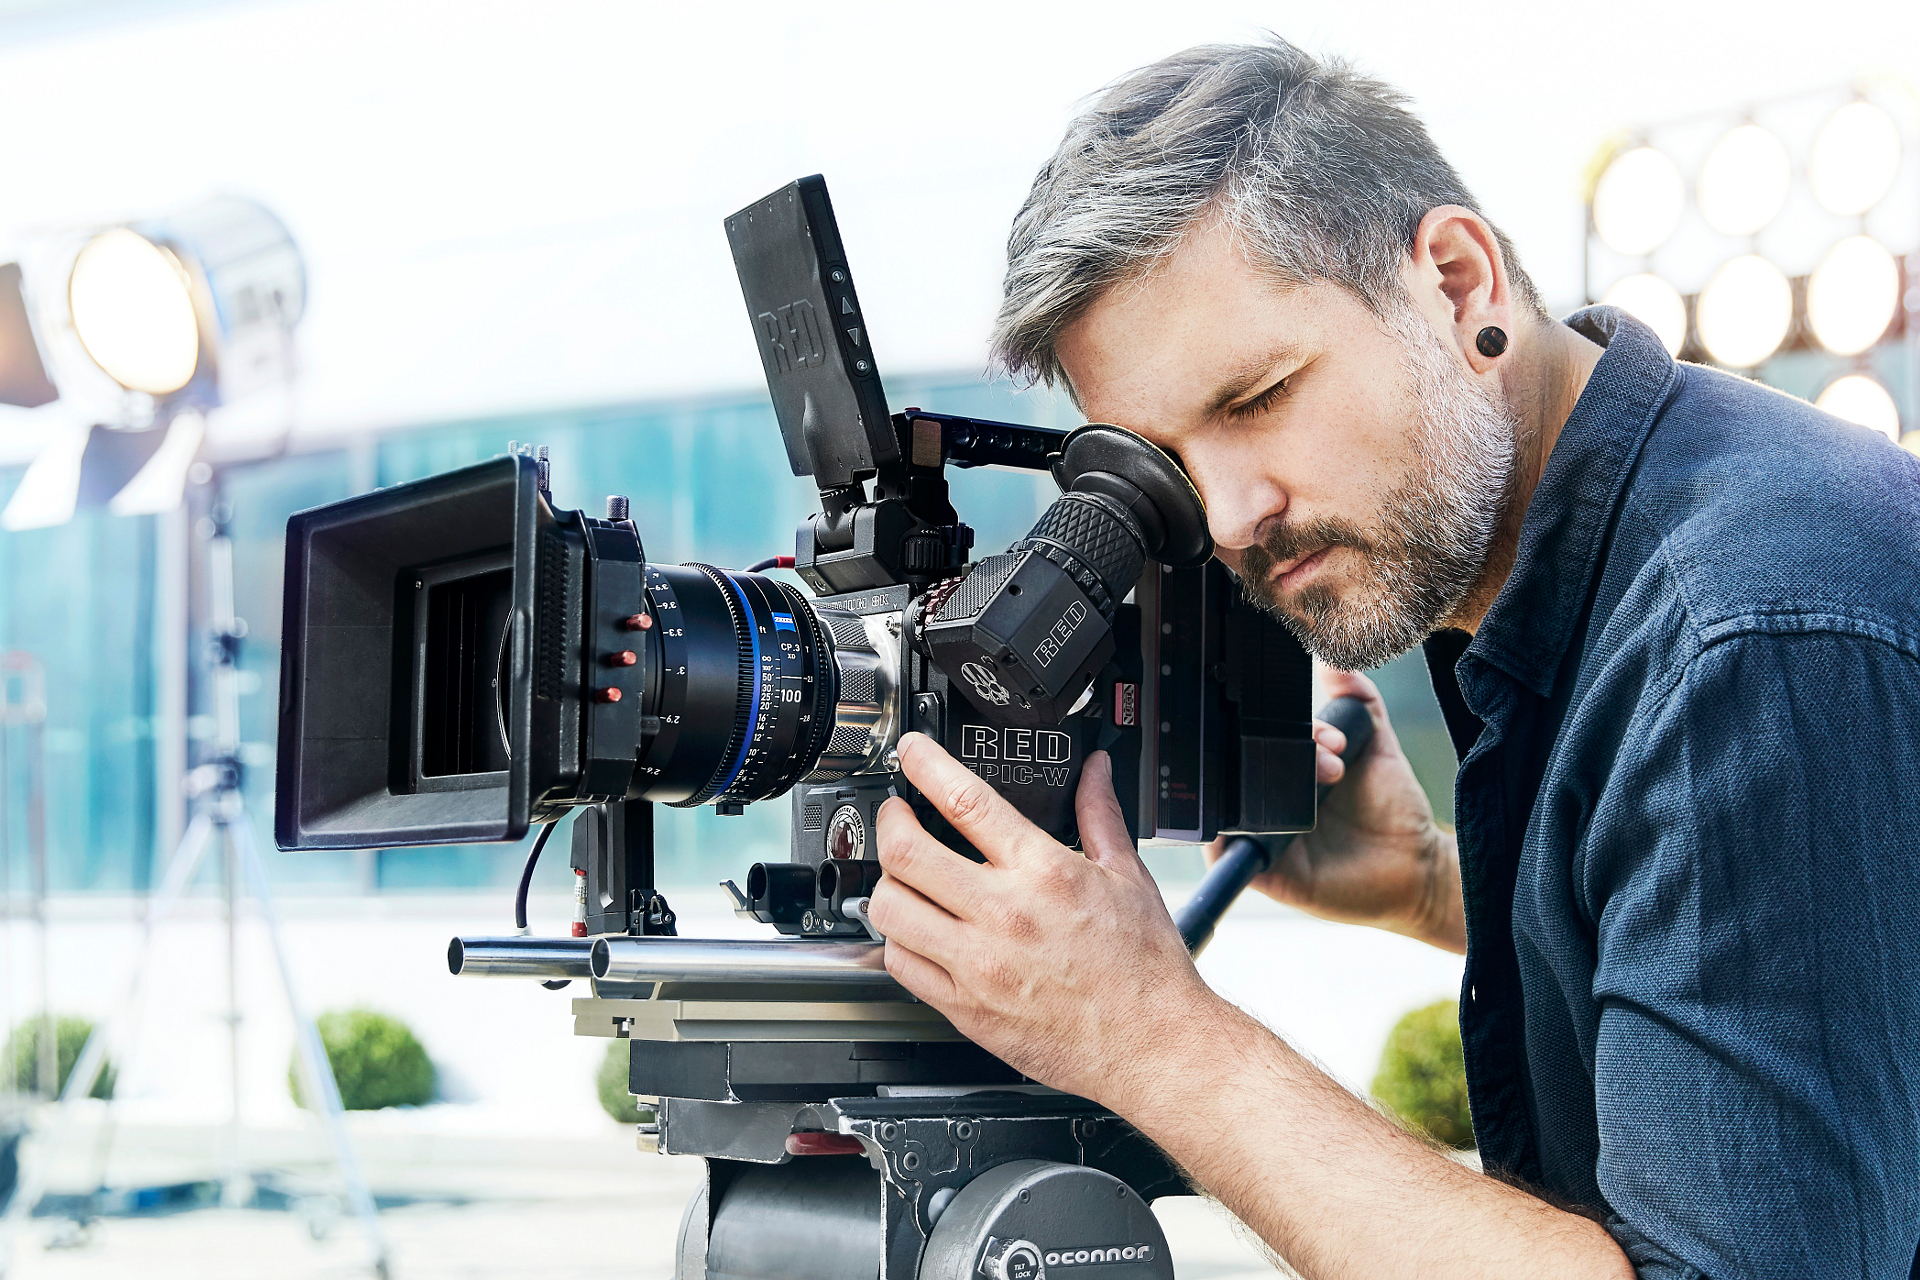 ZEISS Cinematography | Turning imagination into a motion picture